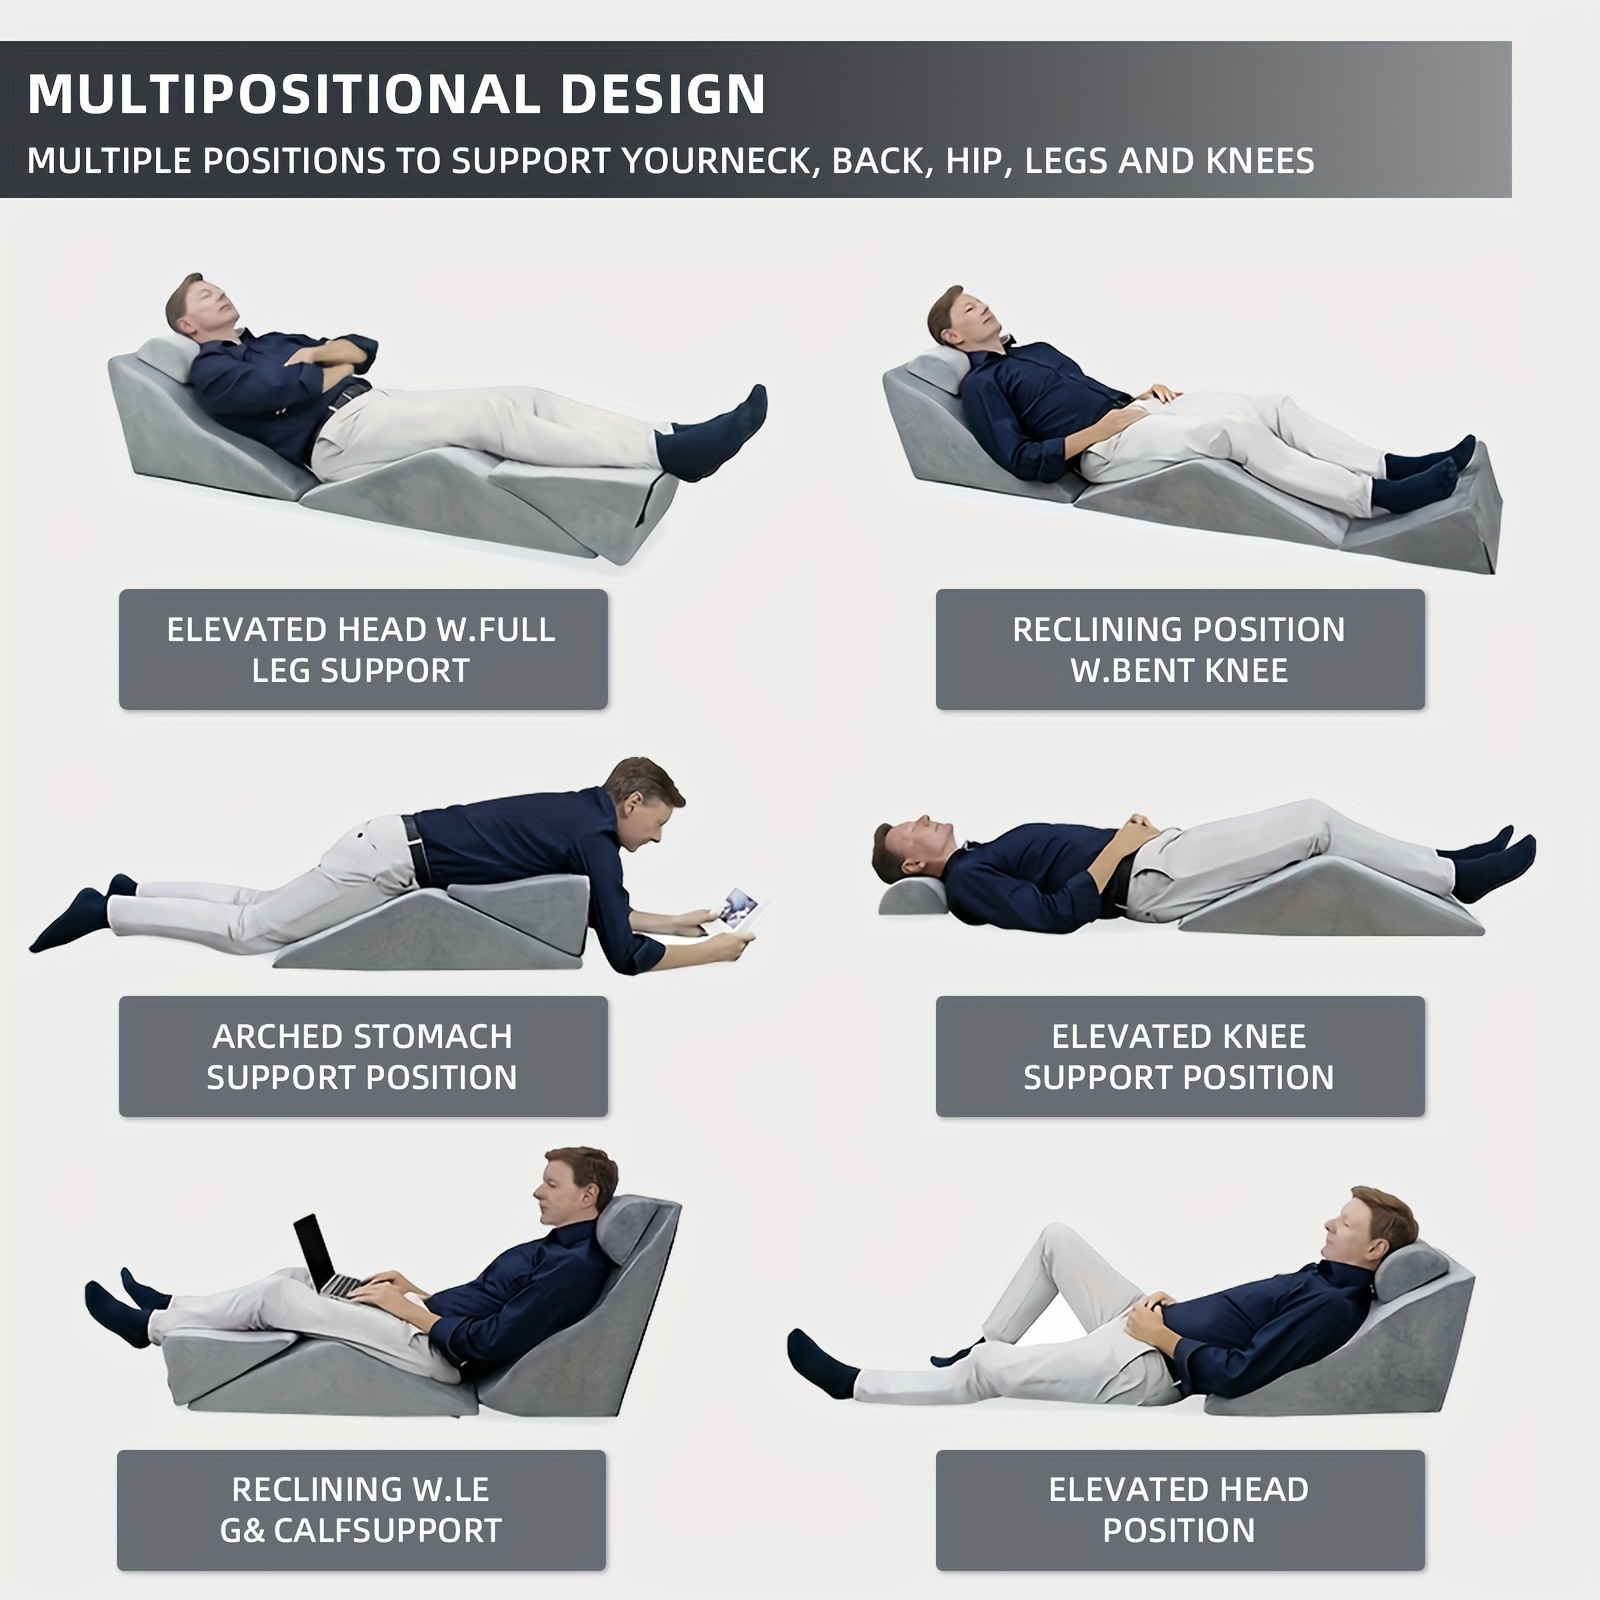 Back Pain Pillow, Wedge Pillow, Back Cushion, Pillow for Back Support, Back  Rest for the Bed 